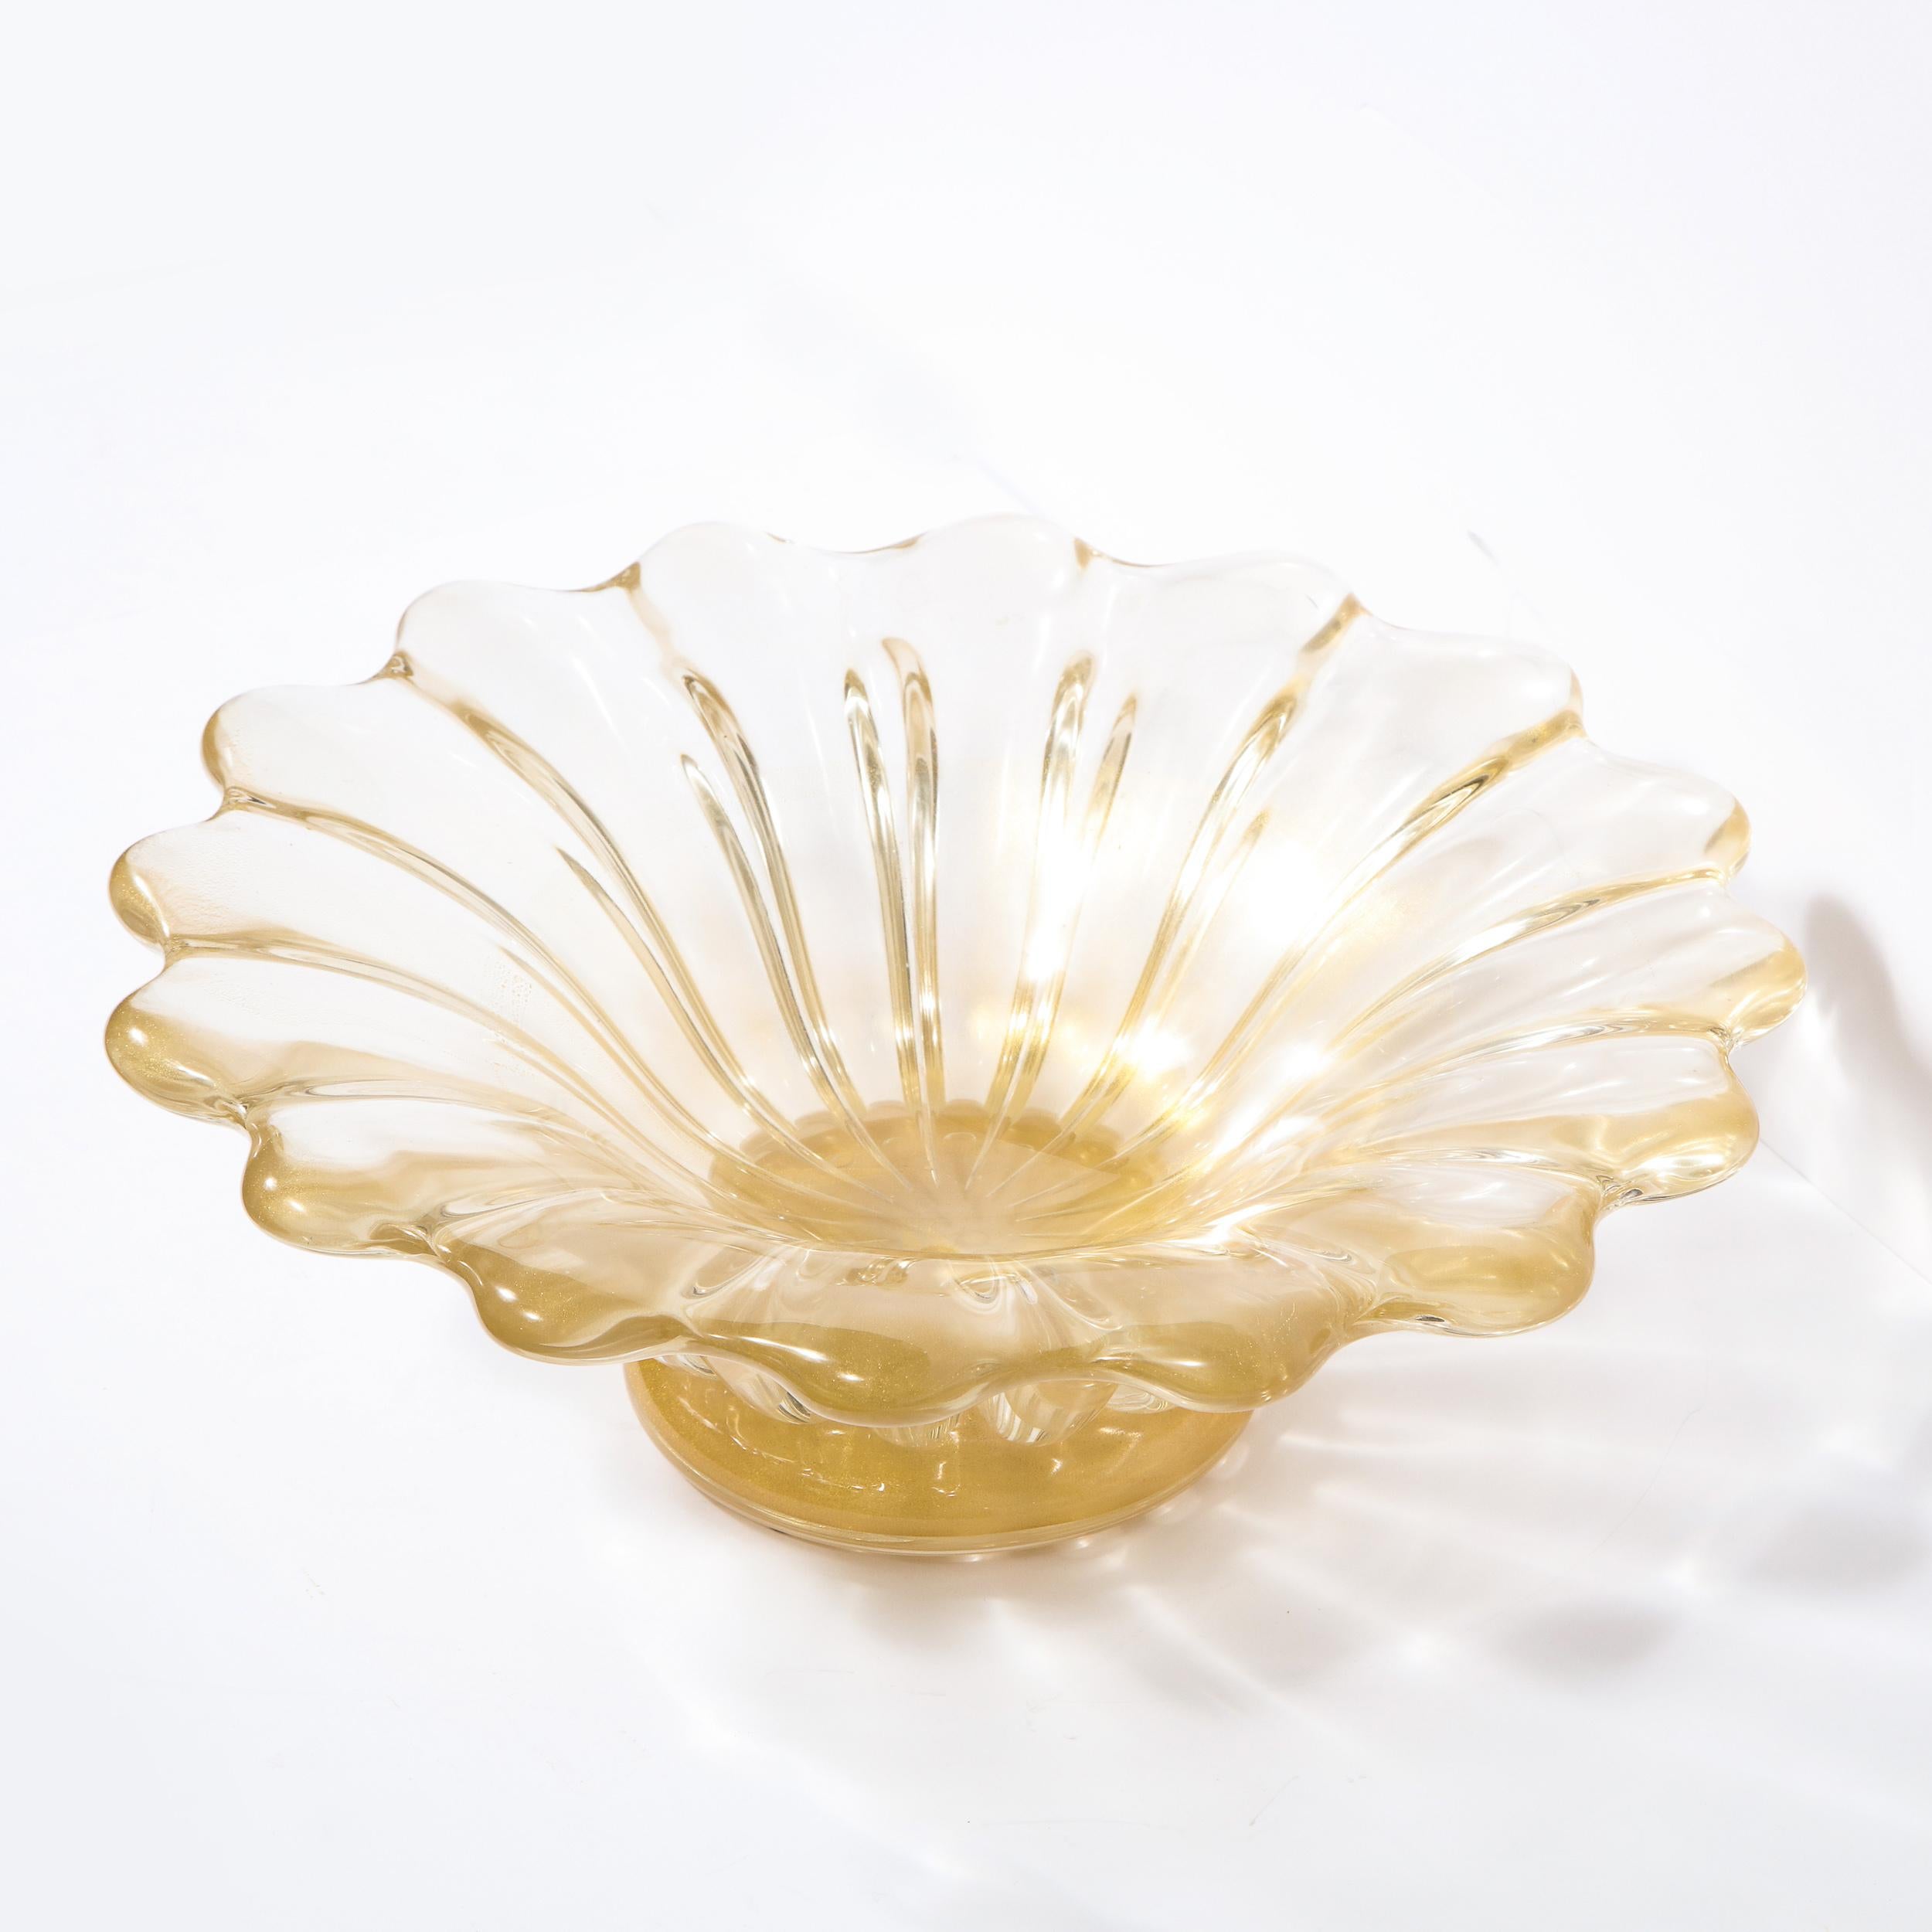 Mid-20th Century Mid-Century Modern Sculptural Scalloped Murano Glass Bowl by Archimede Seguso